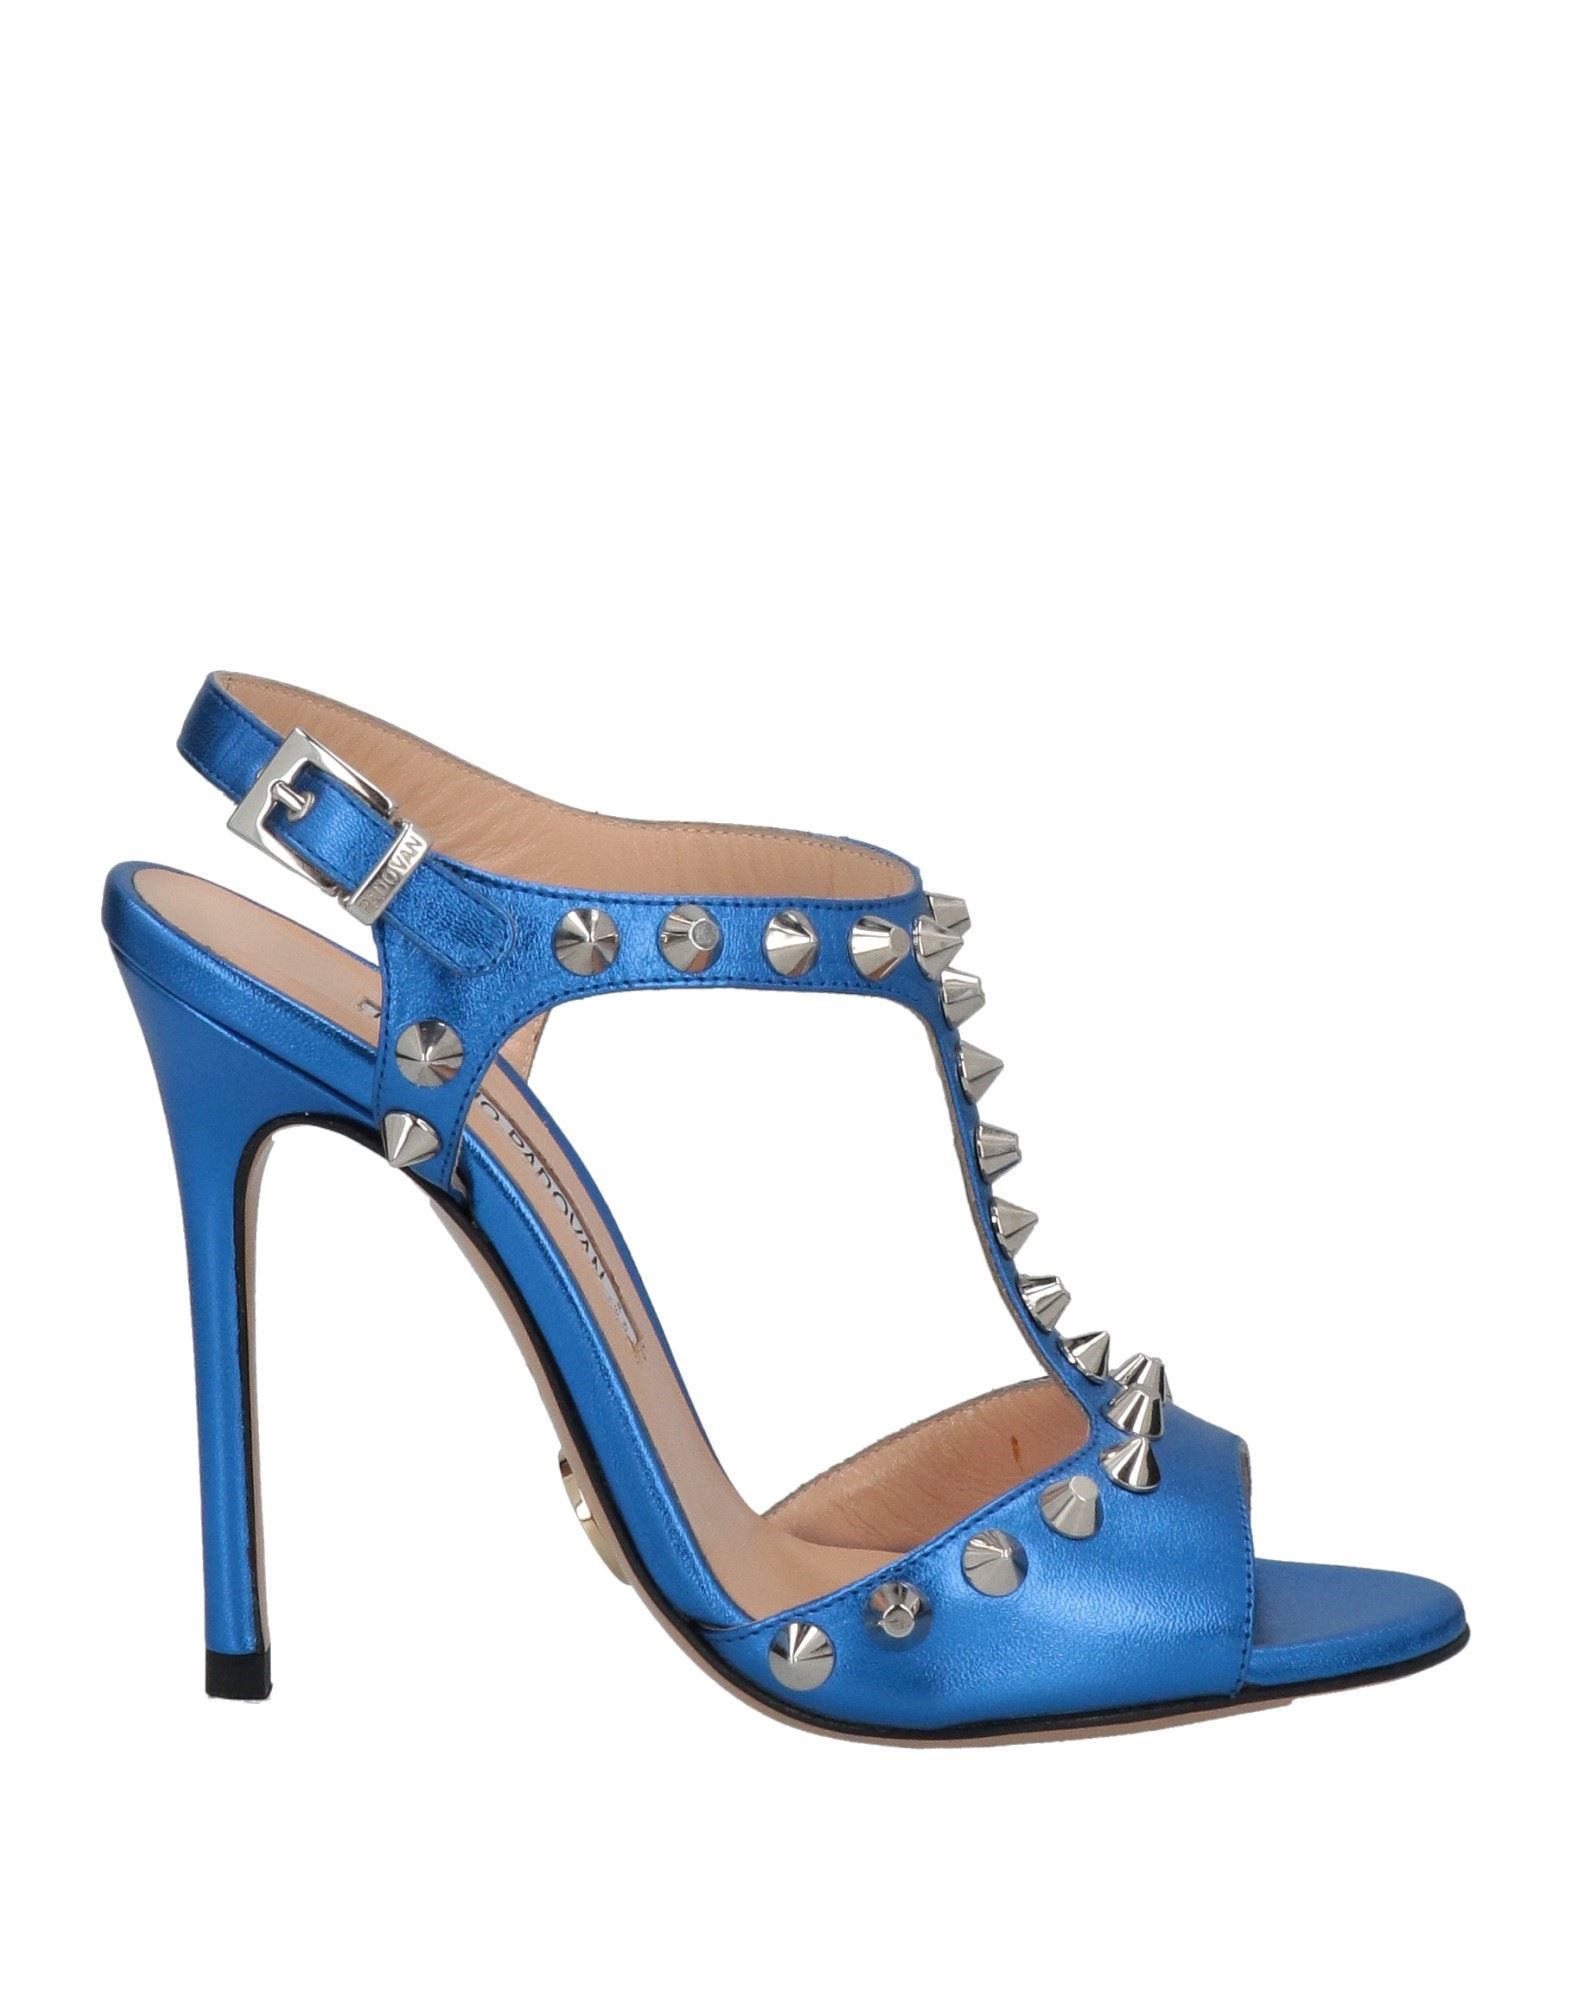 Luciano Padovan Sandals In Bright Blue